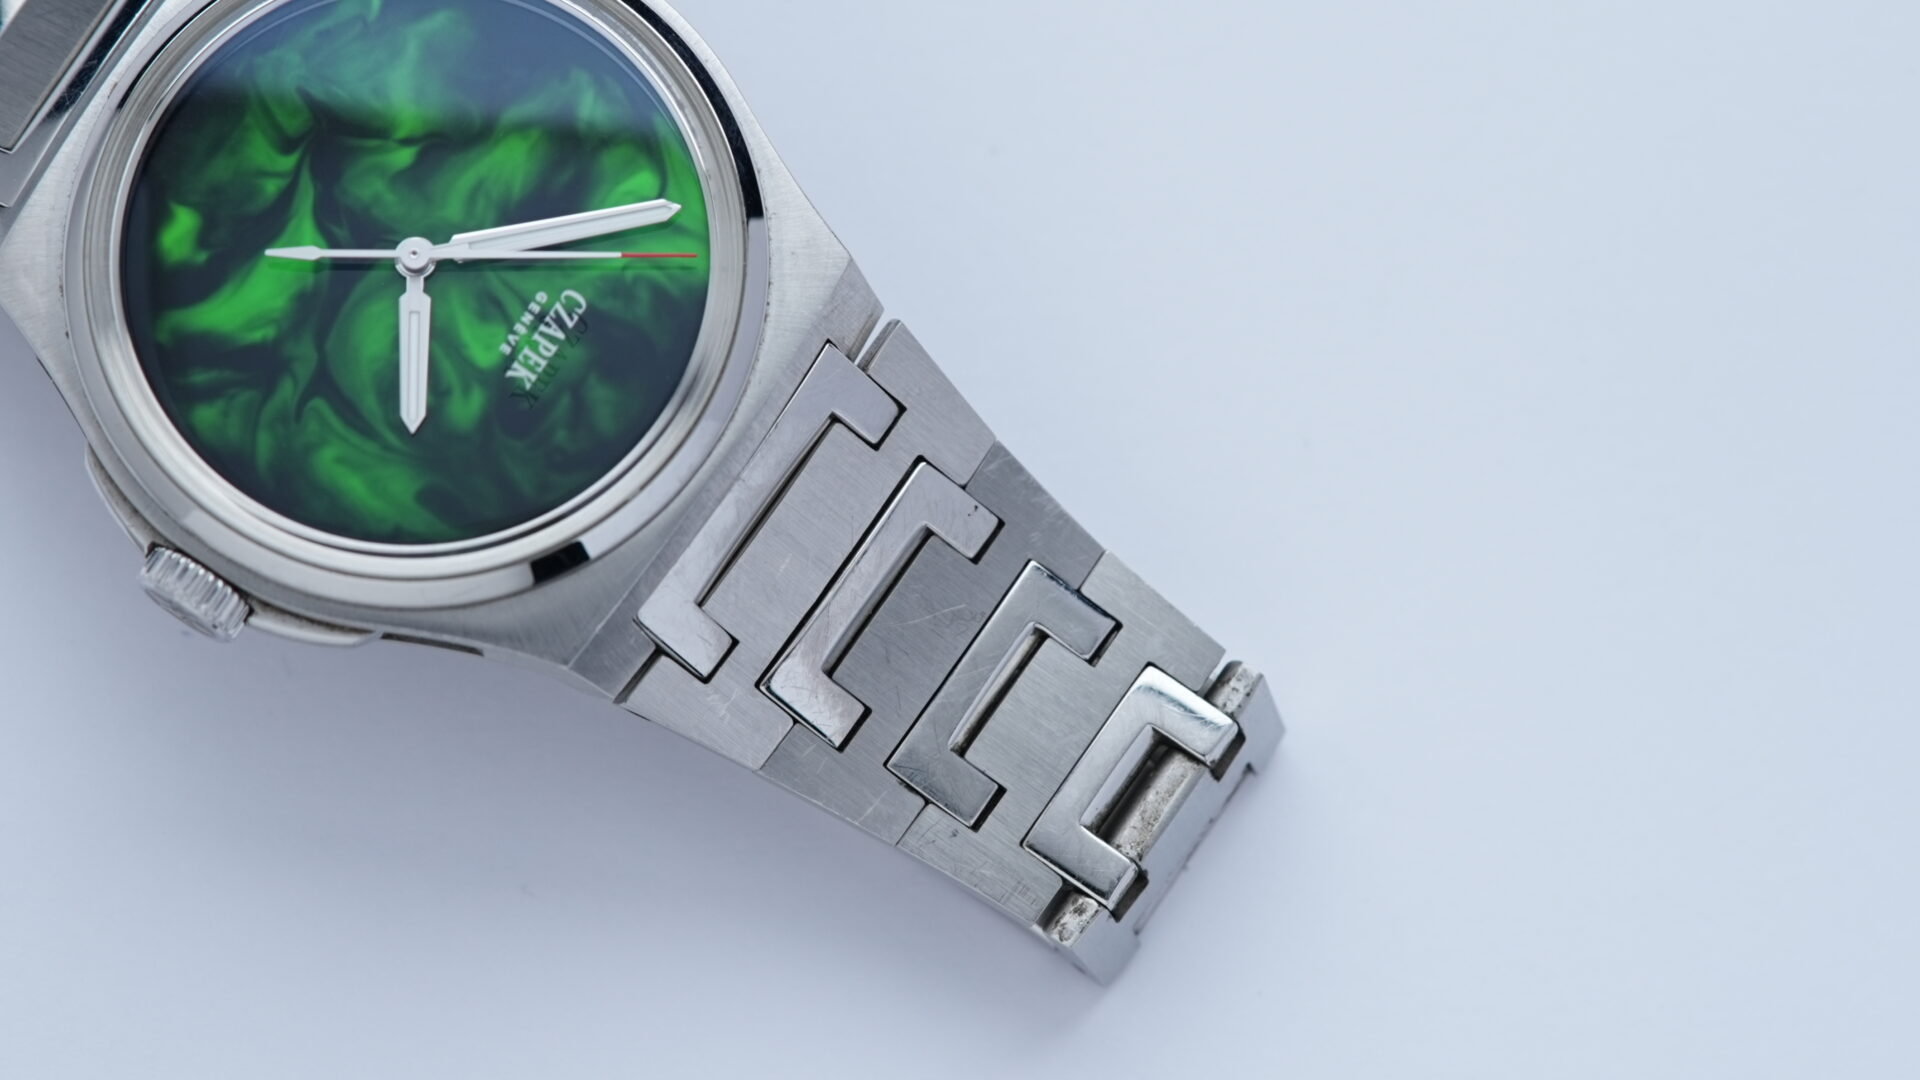 Czapek ANTARCTIQUE SPECIAL EDITION Emerald Iceberg Limited Edition watch angle shot.